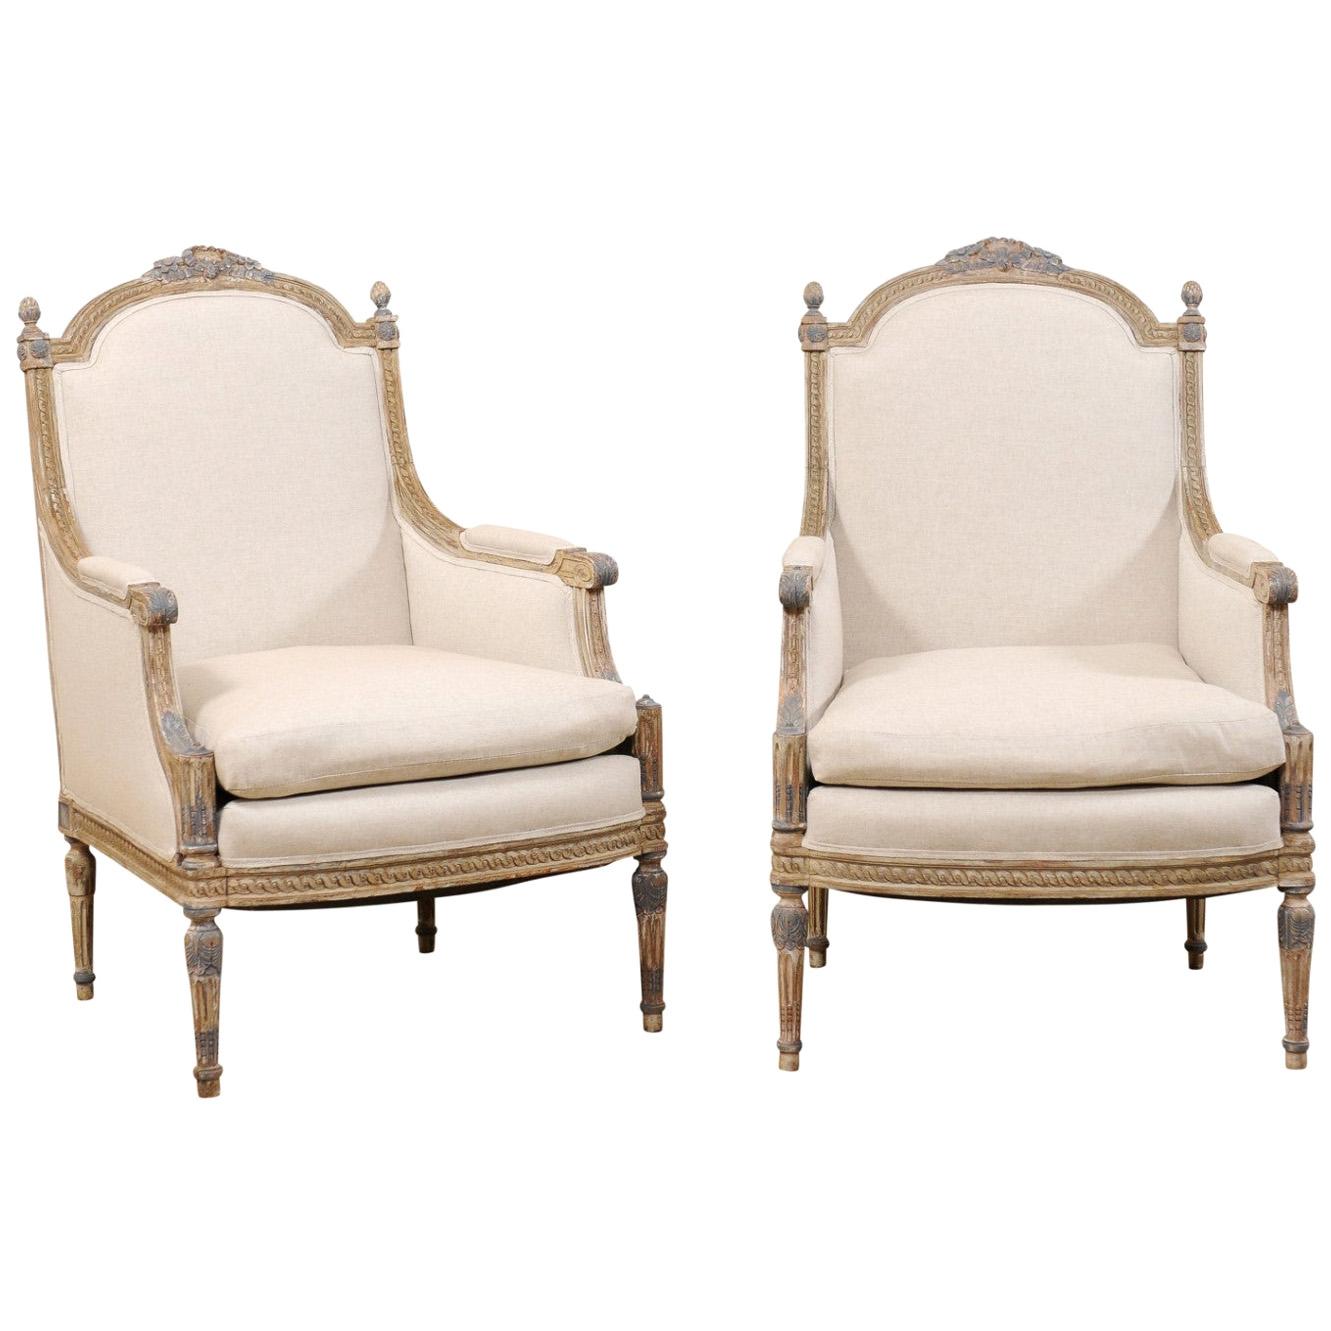 19th Century French Pair of Louis XVI Style Bergère Chairs, Newly Upholstered